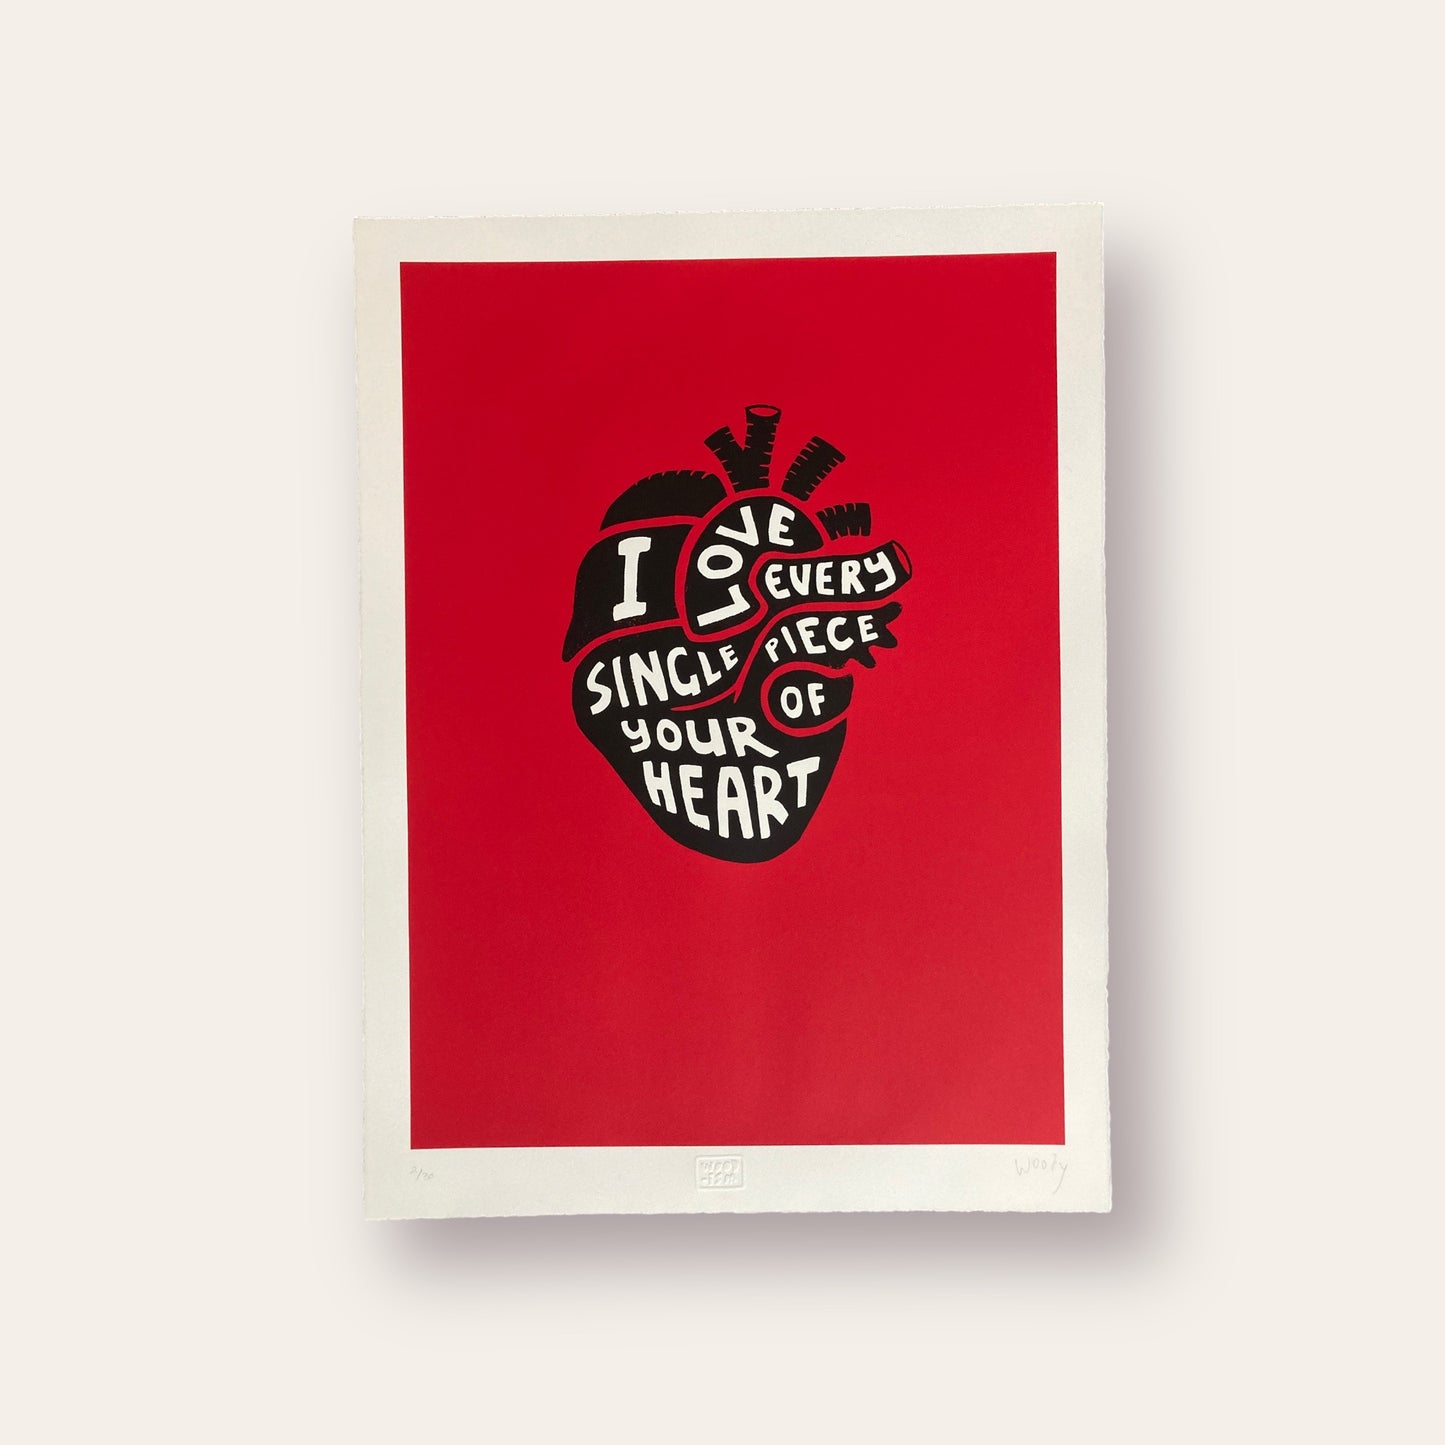 LIMITED EDITION "Heart" - Large Signed Screenprint